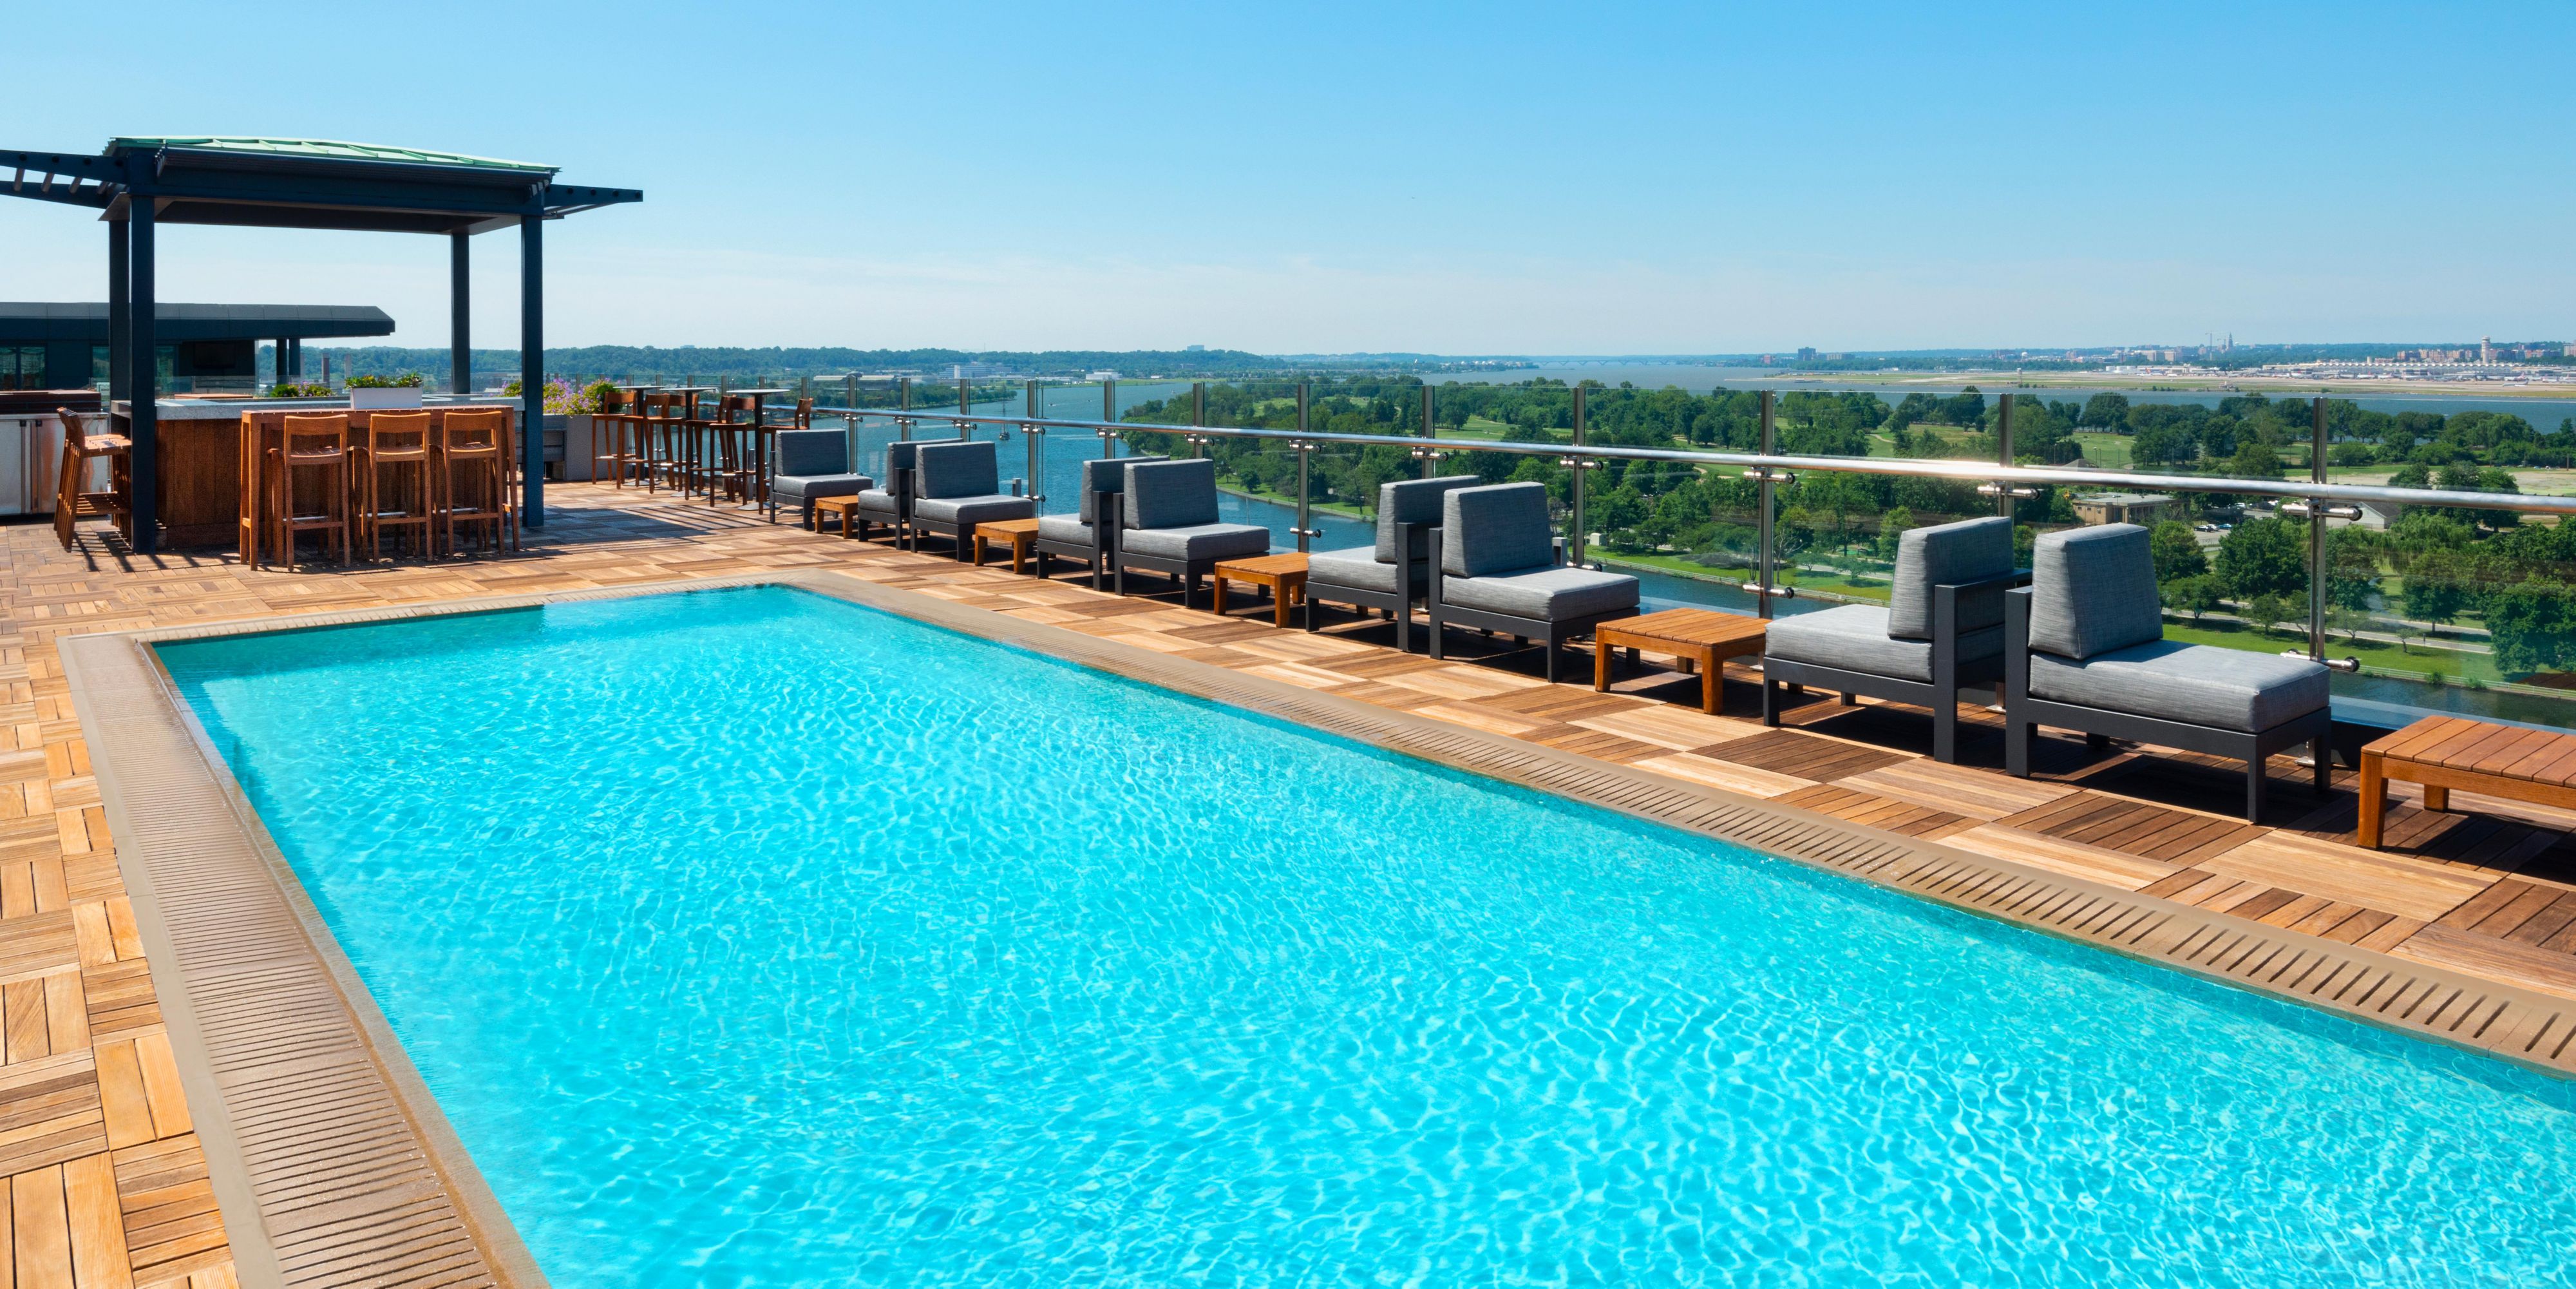 Whether you want to swim laps first thing in the morning or enjoy the D.C. sunset with a cocktail in hand, our rooftop is the ideal place to unwind. Our rooftop infinity pool and bar offer unparalleled views and are open exclusively for hotel guests. Take in the stunning vistas while sampling light appetizers and crafted cocktails.